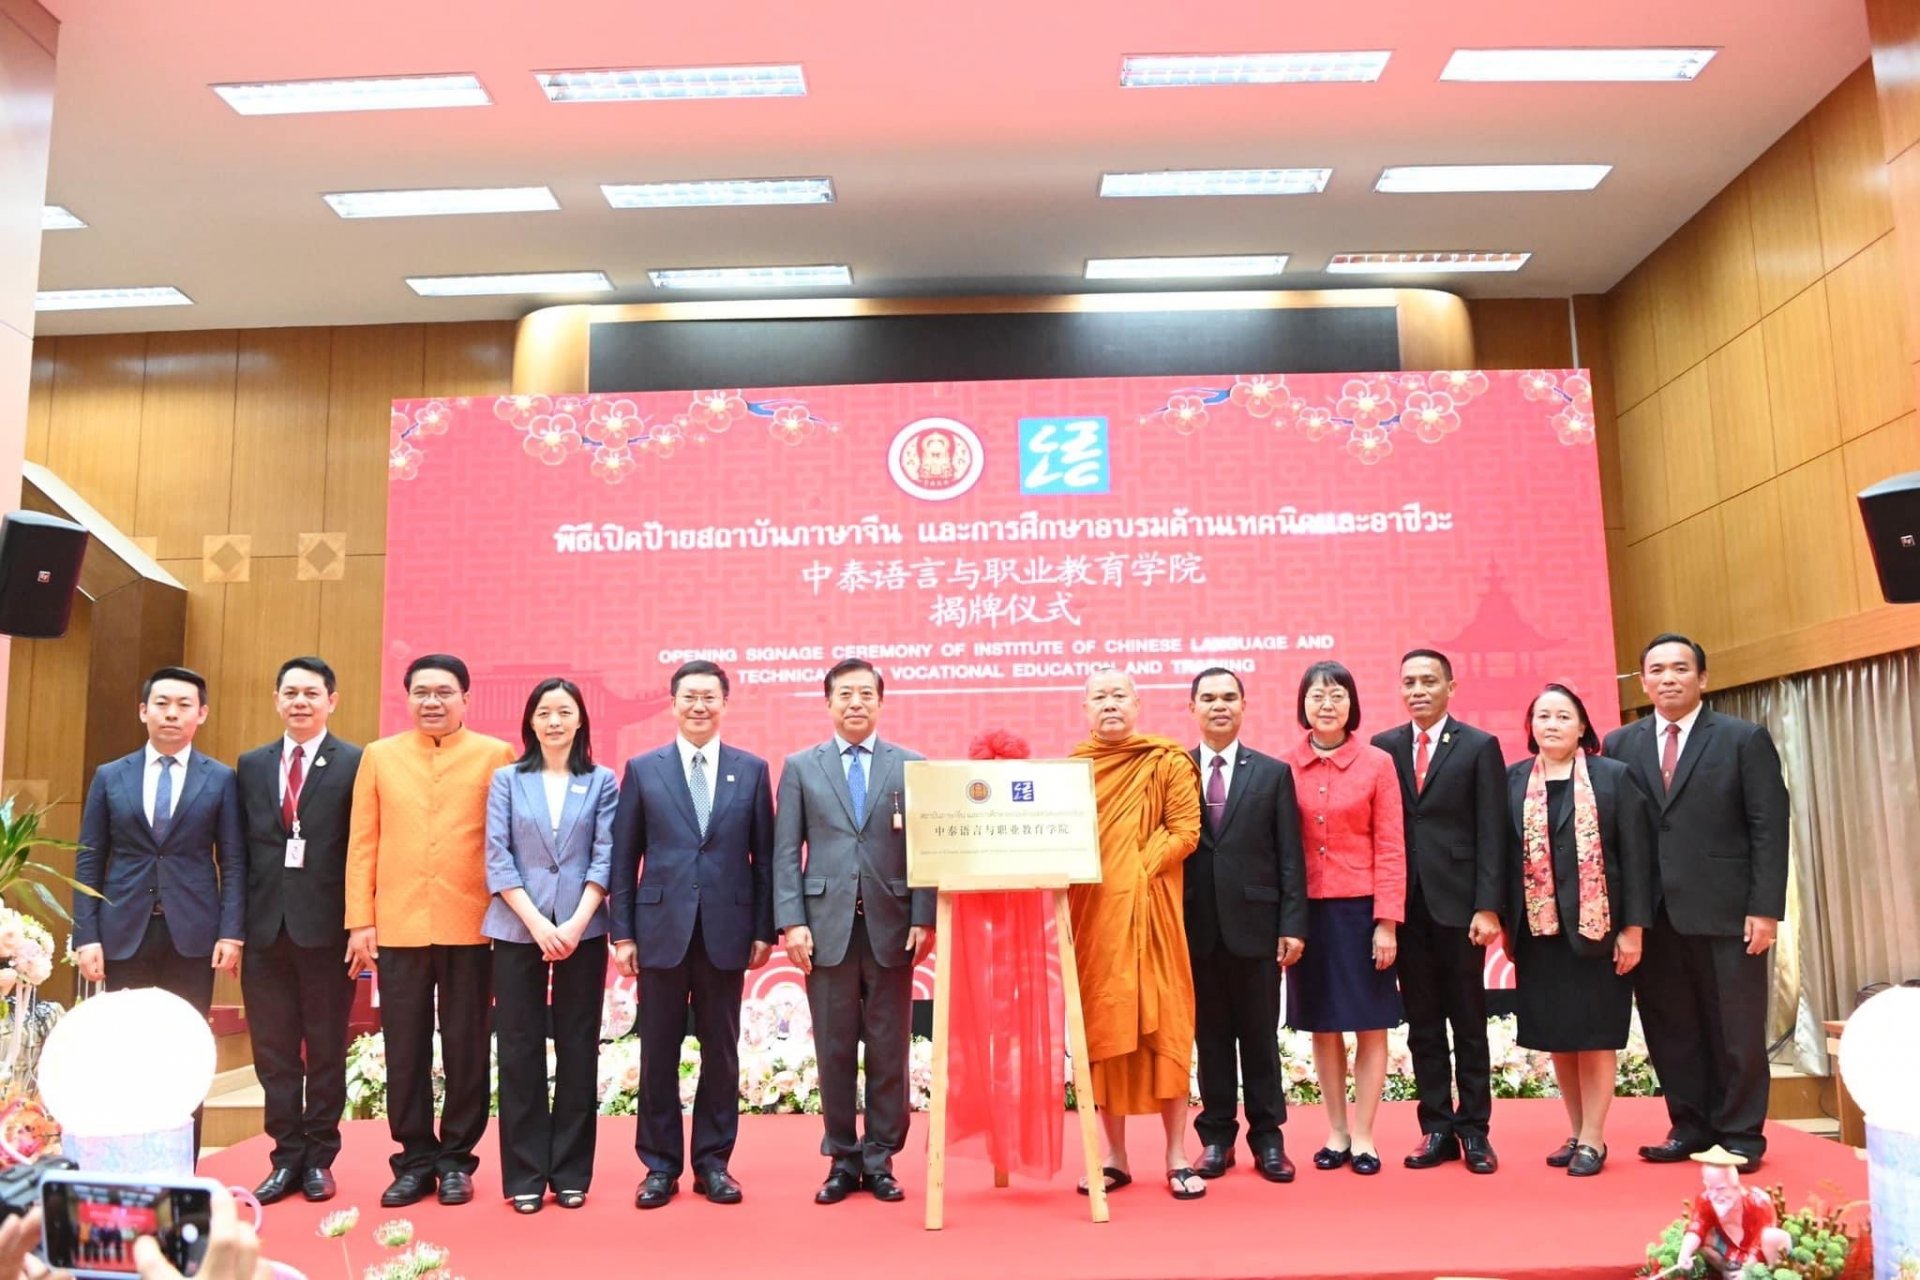 Sonothai Education was invited to participate in the unveiling ceremony of the world's first language and vocational education institute